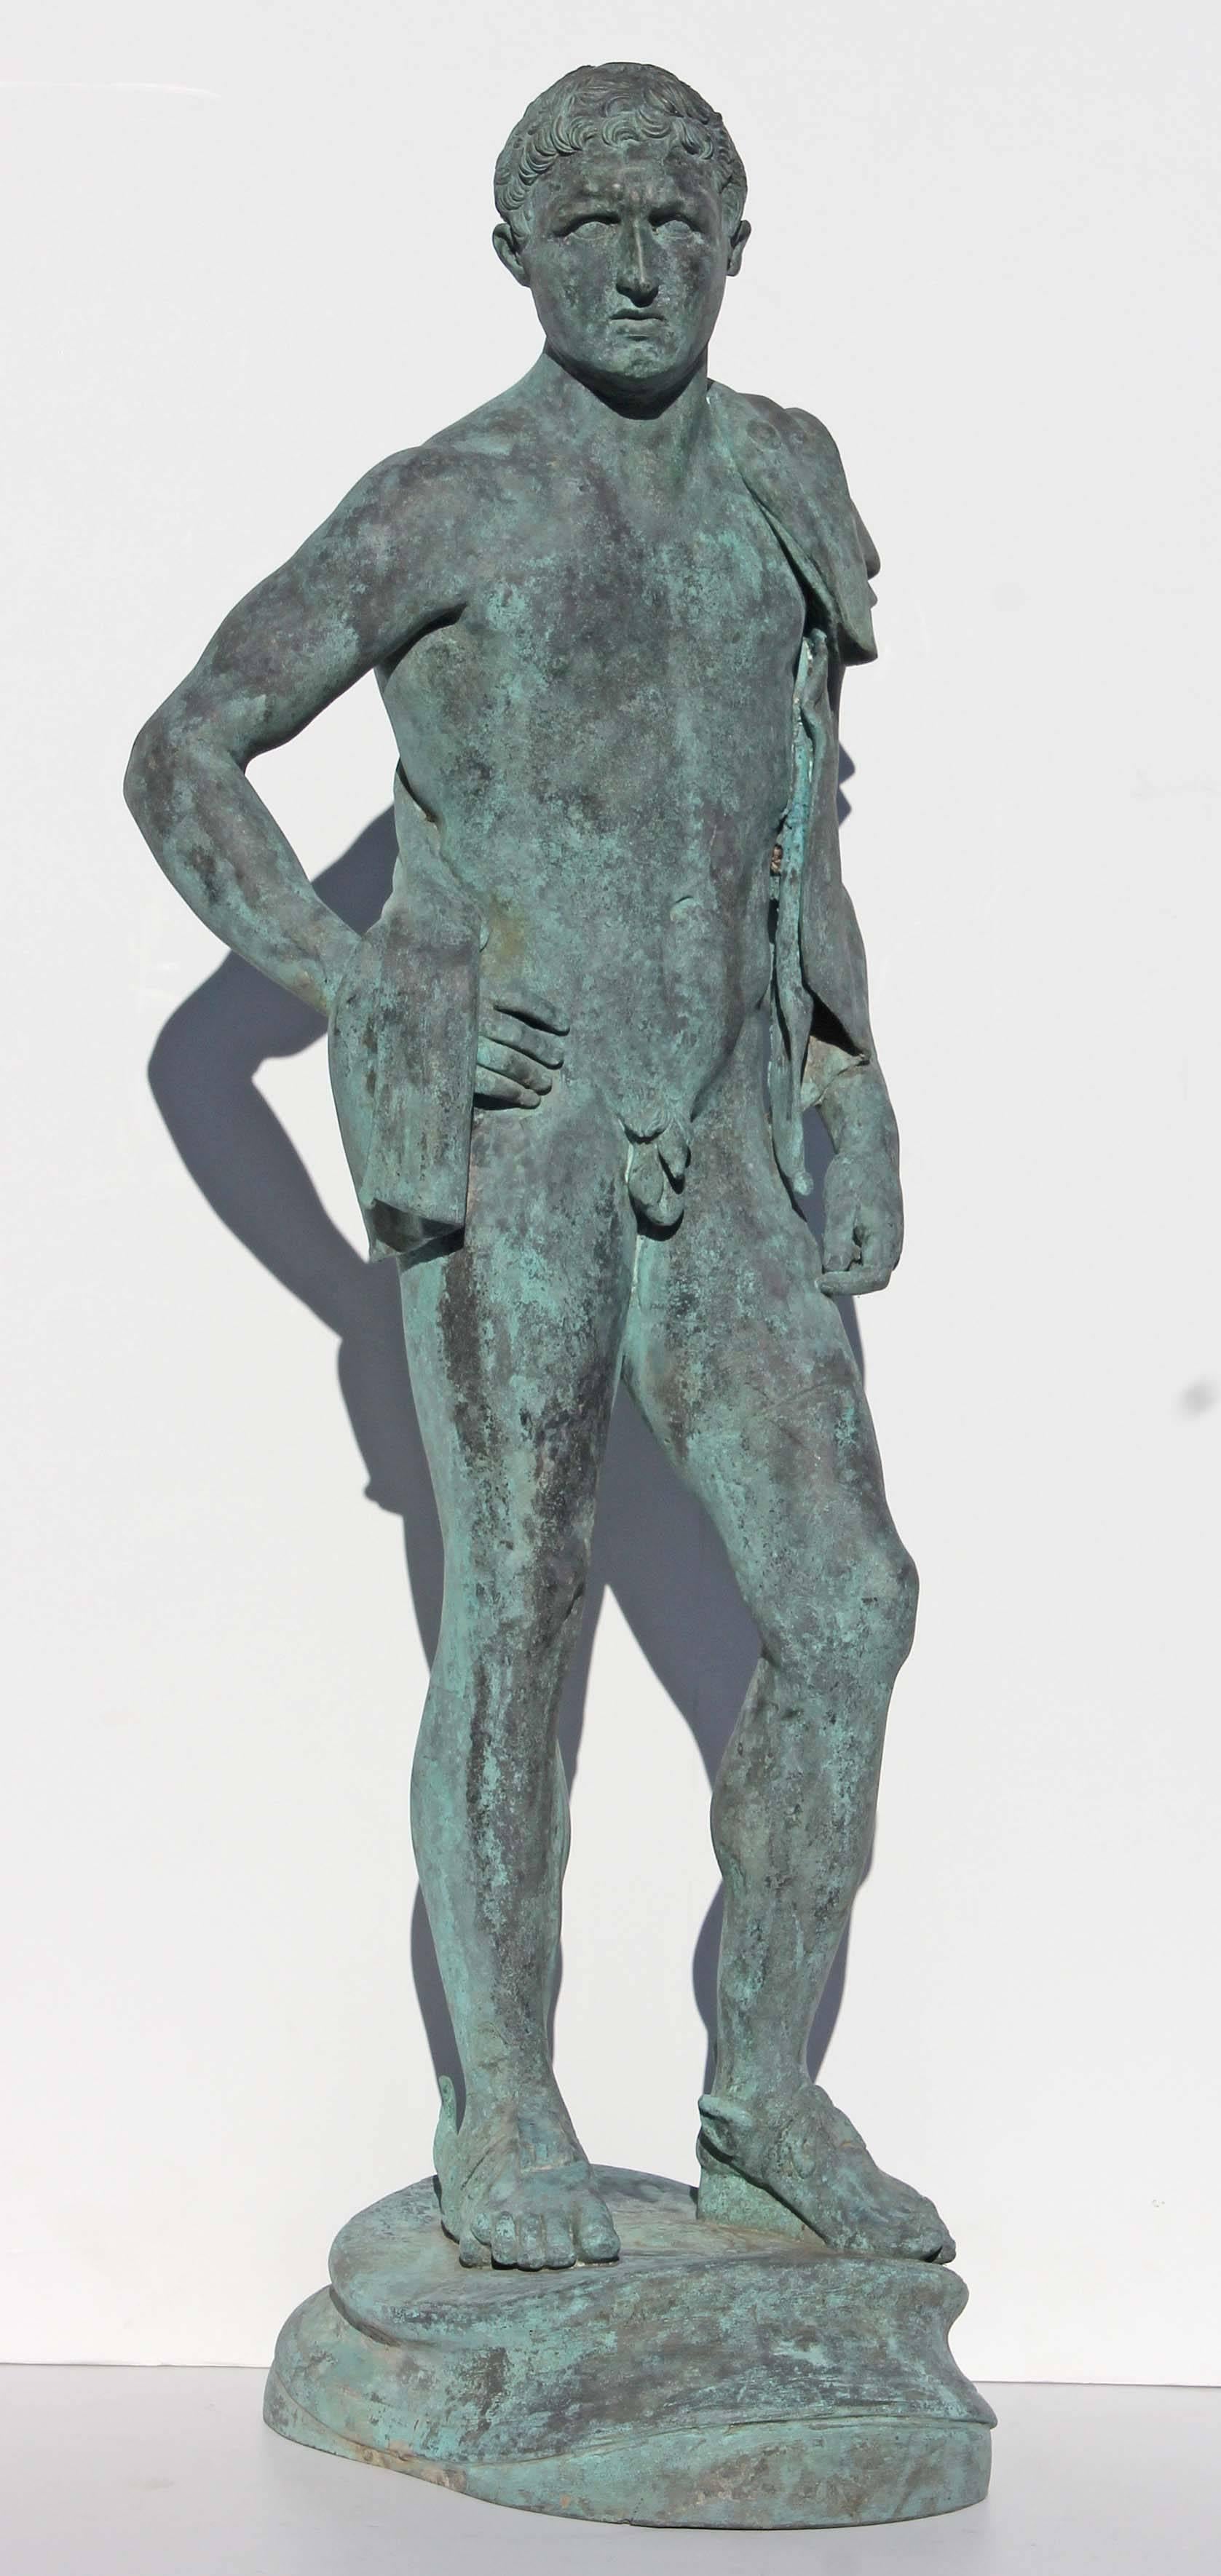 Large Italian bronze garden sculpture of Hermes after the antique. A classical 19th century Grand Tour sculpture cast by U. Marcellini.